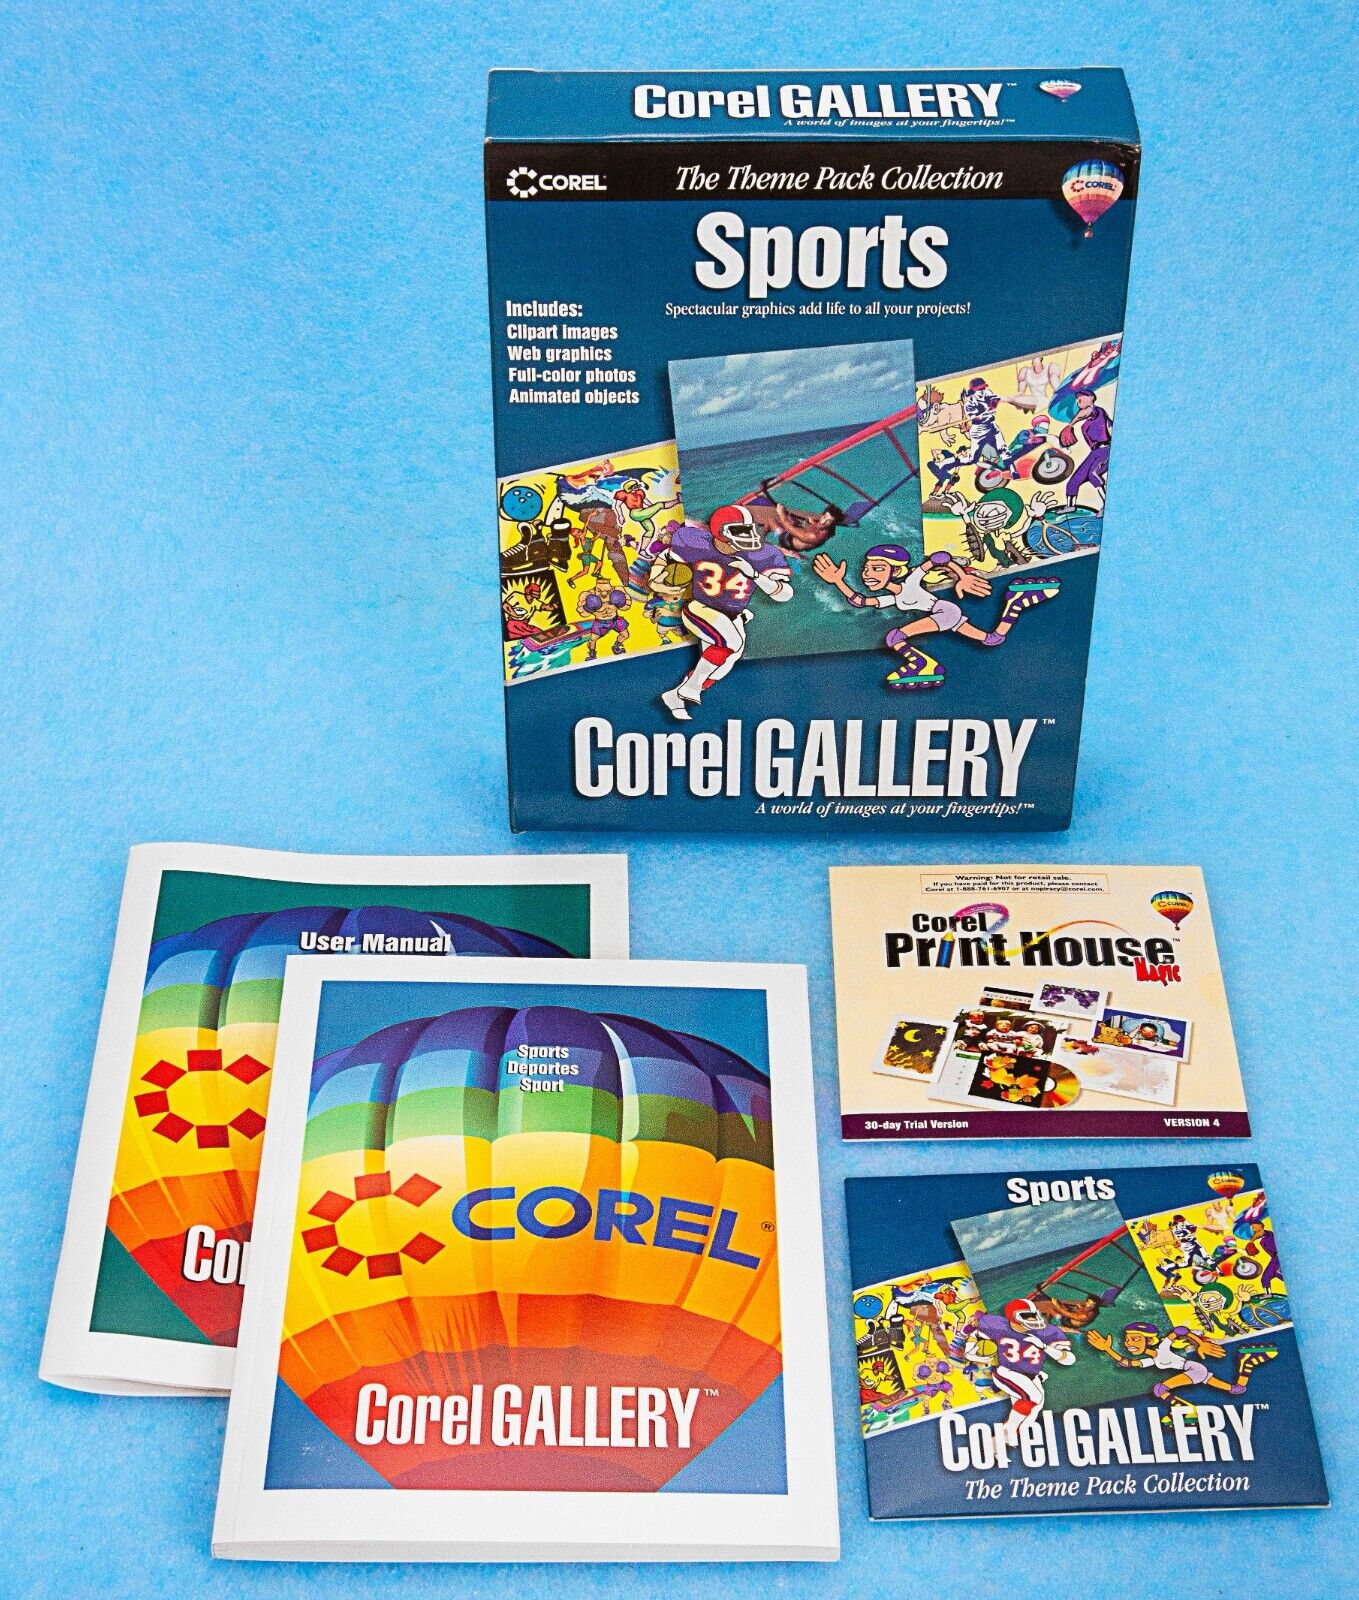 NEW Corel Gallery SPORTS - THEME PACK COLLECTION with Full color clip art Manual